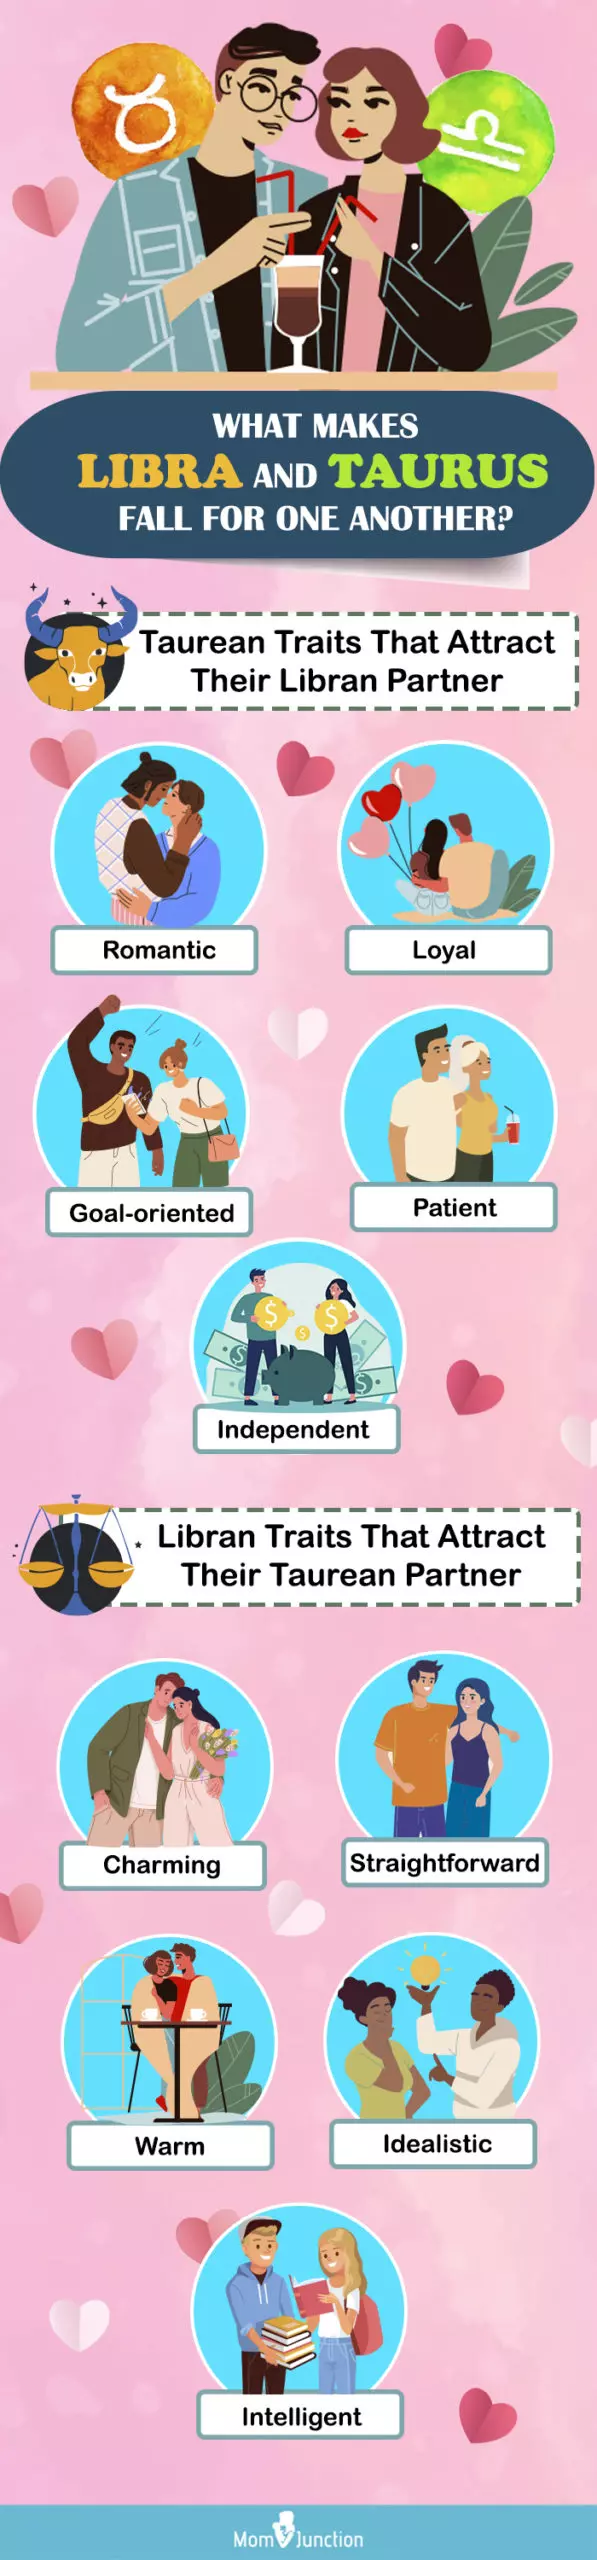 qualities of libra and taurus that attract them to each other (infographic)